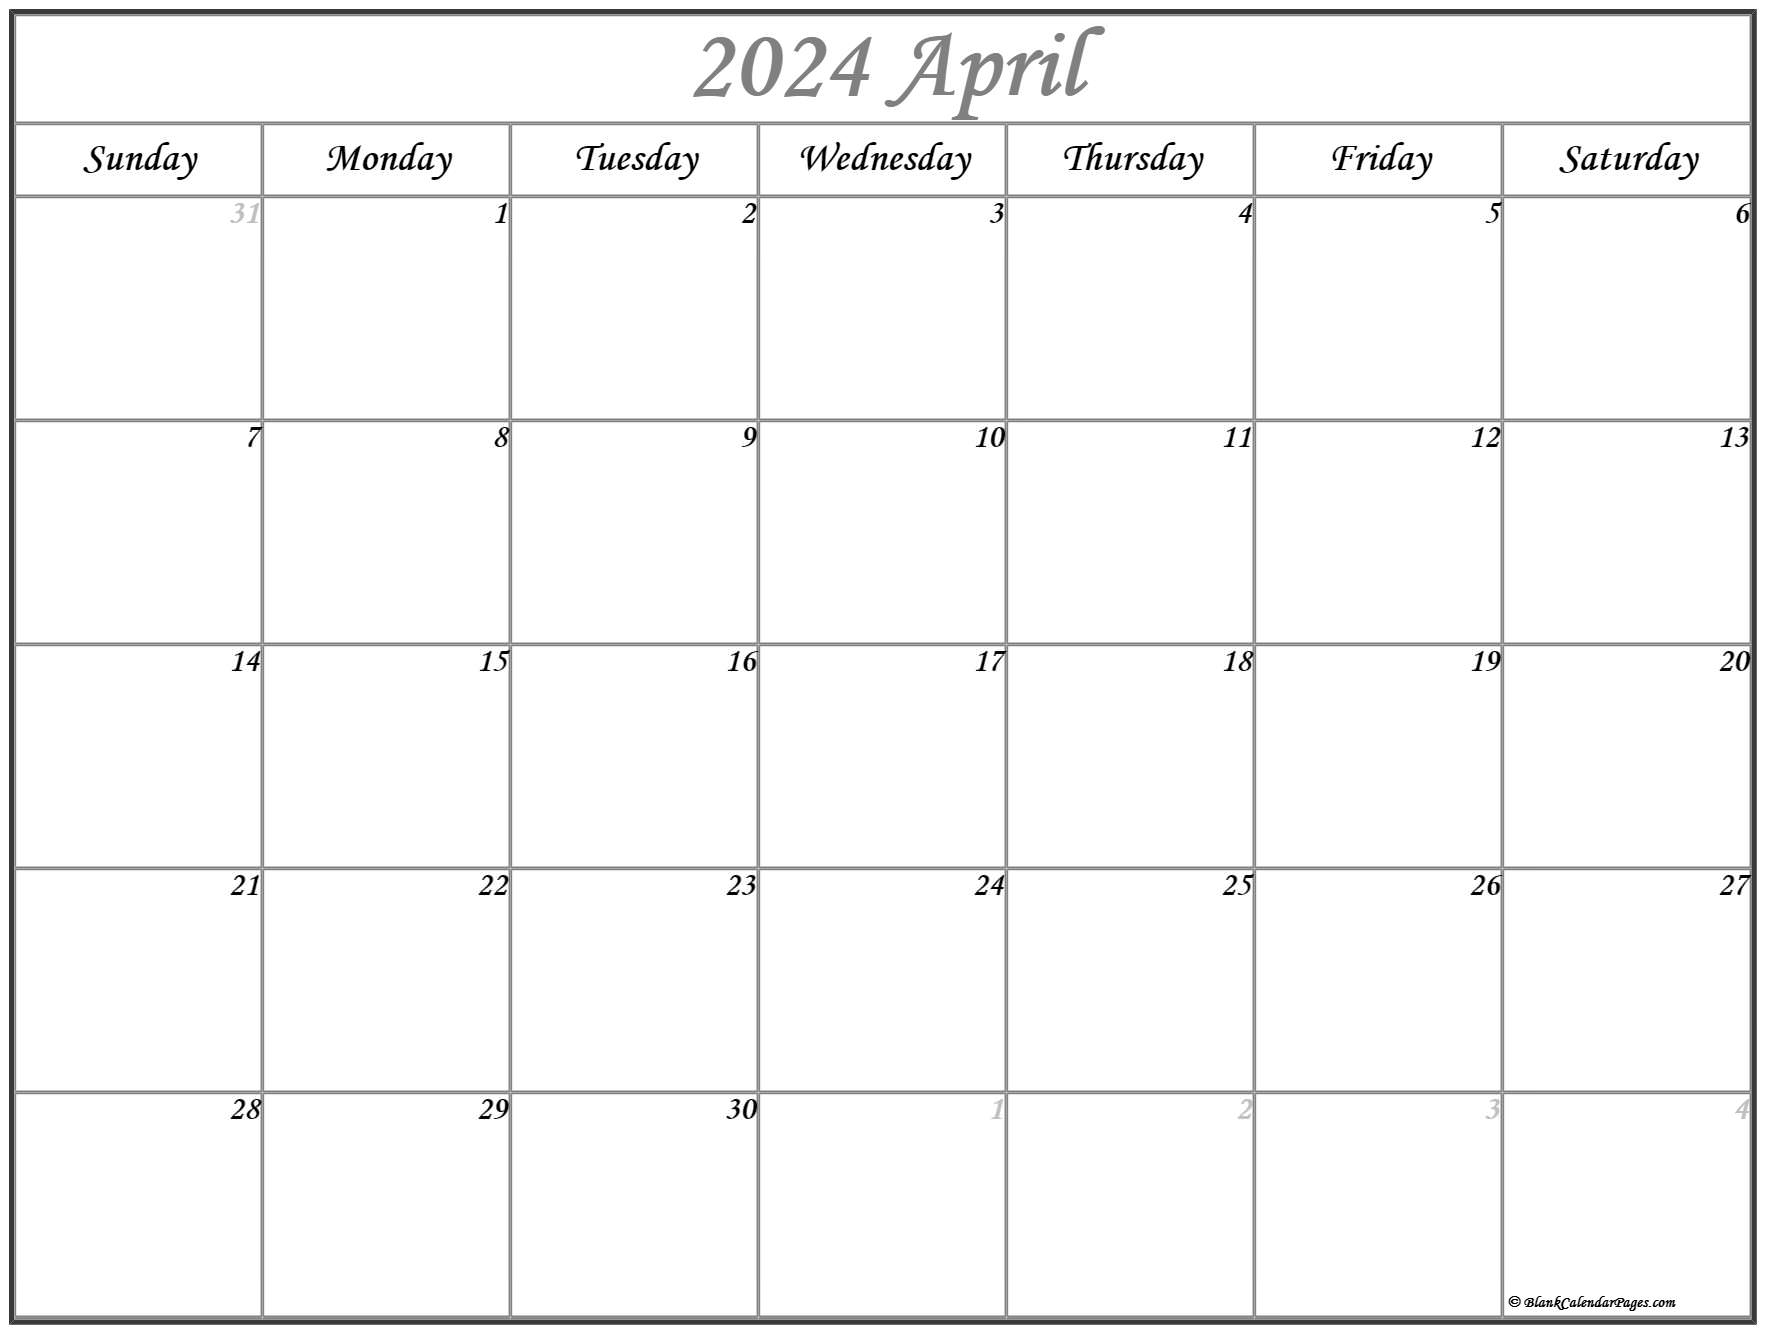 My friends and I made a calendar of upcoming series for April 2023